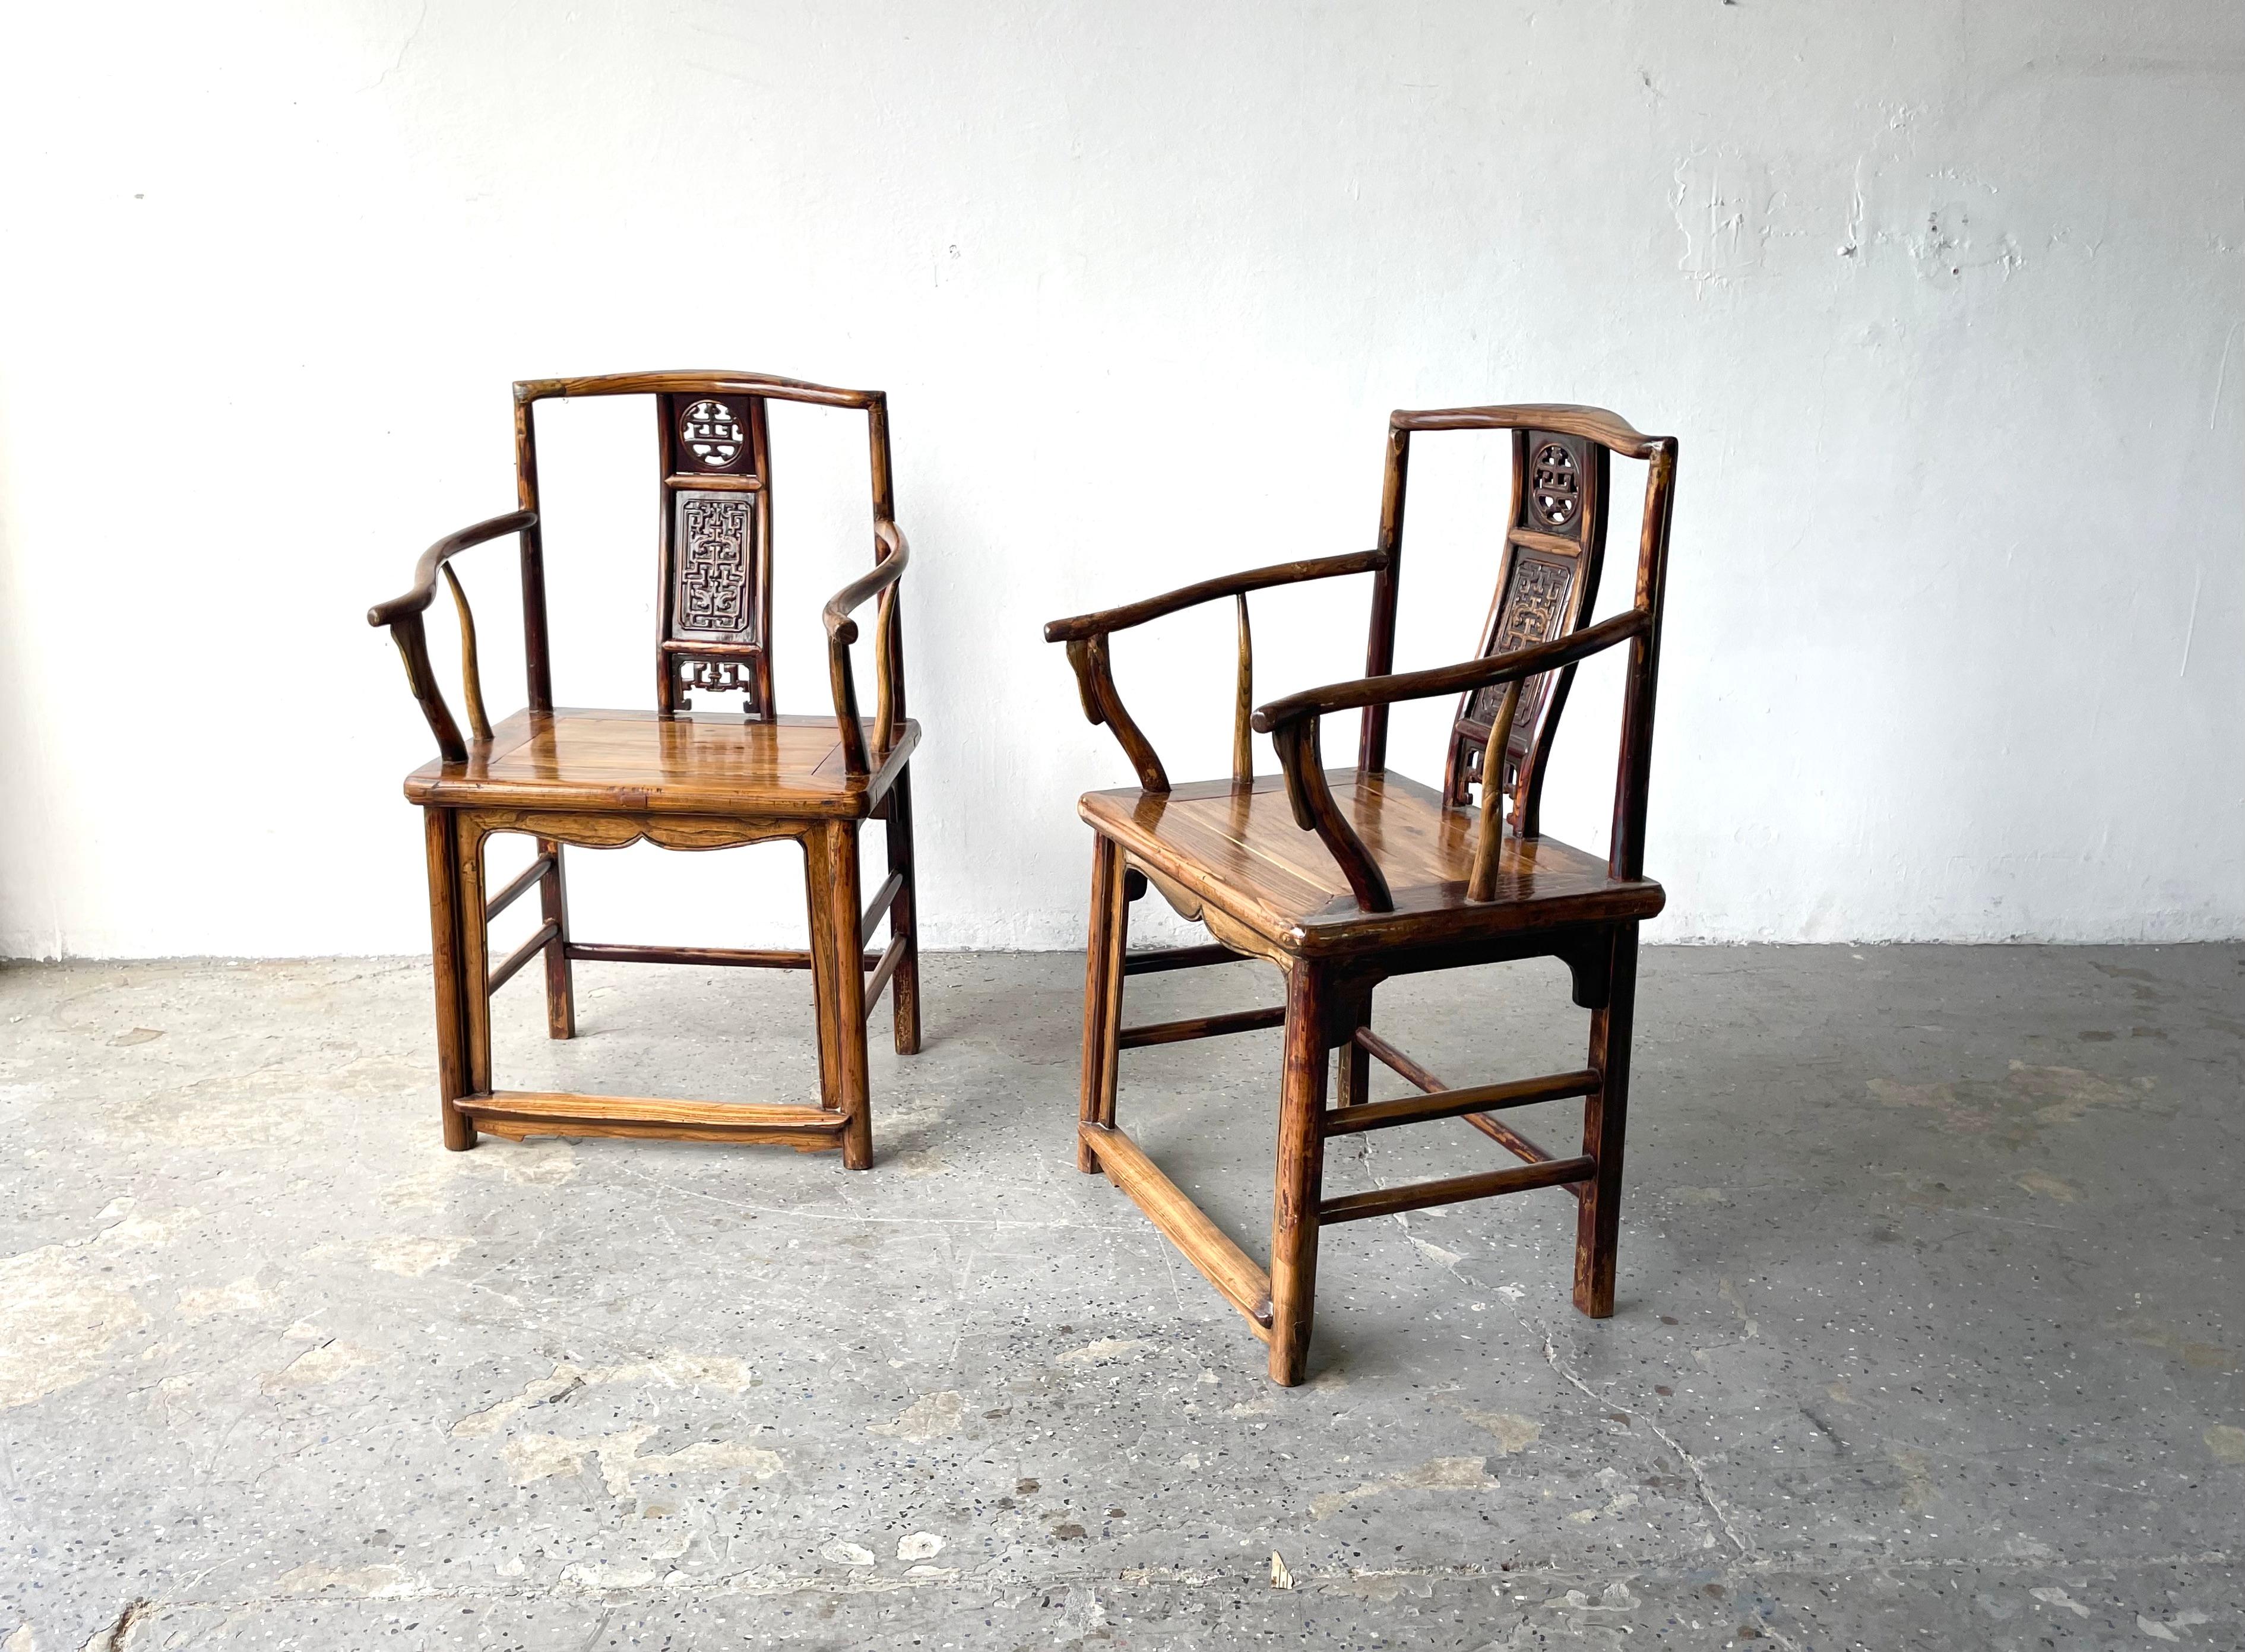 Pair of 19th(1800's) century Chinese hardwood arm chairs.

Absolutely gorgeous pair of skillfully executed hand carved with their elegant lines and the beautiful Lacquer finish, these 19th century Chinese chairs will bring a touch of exoticism to